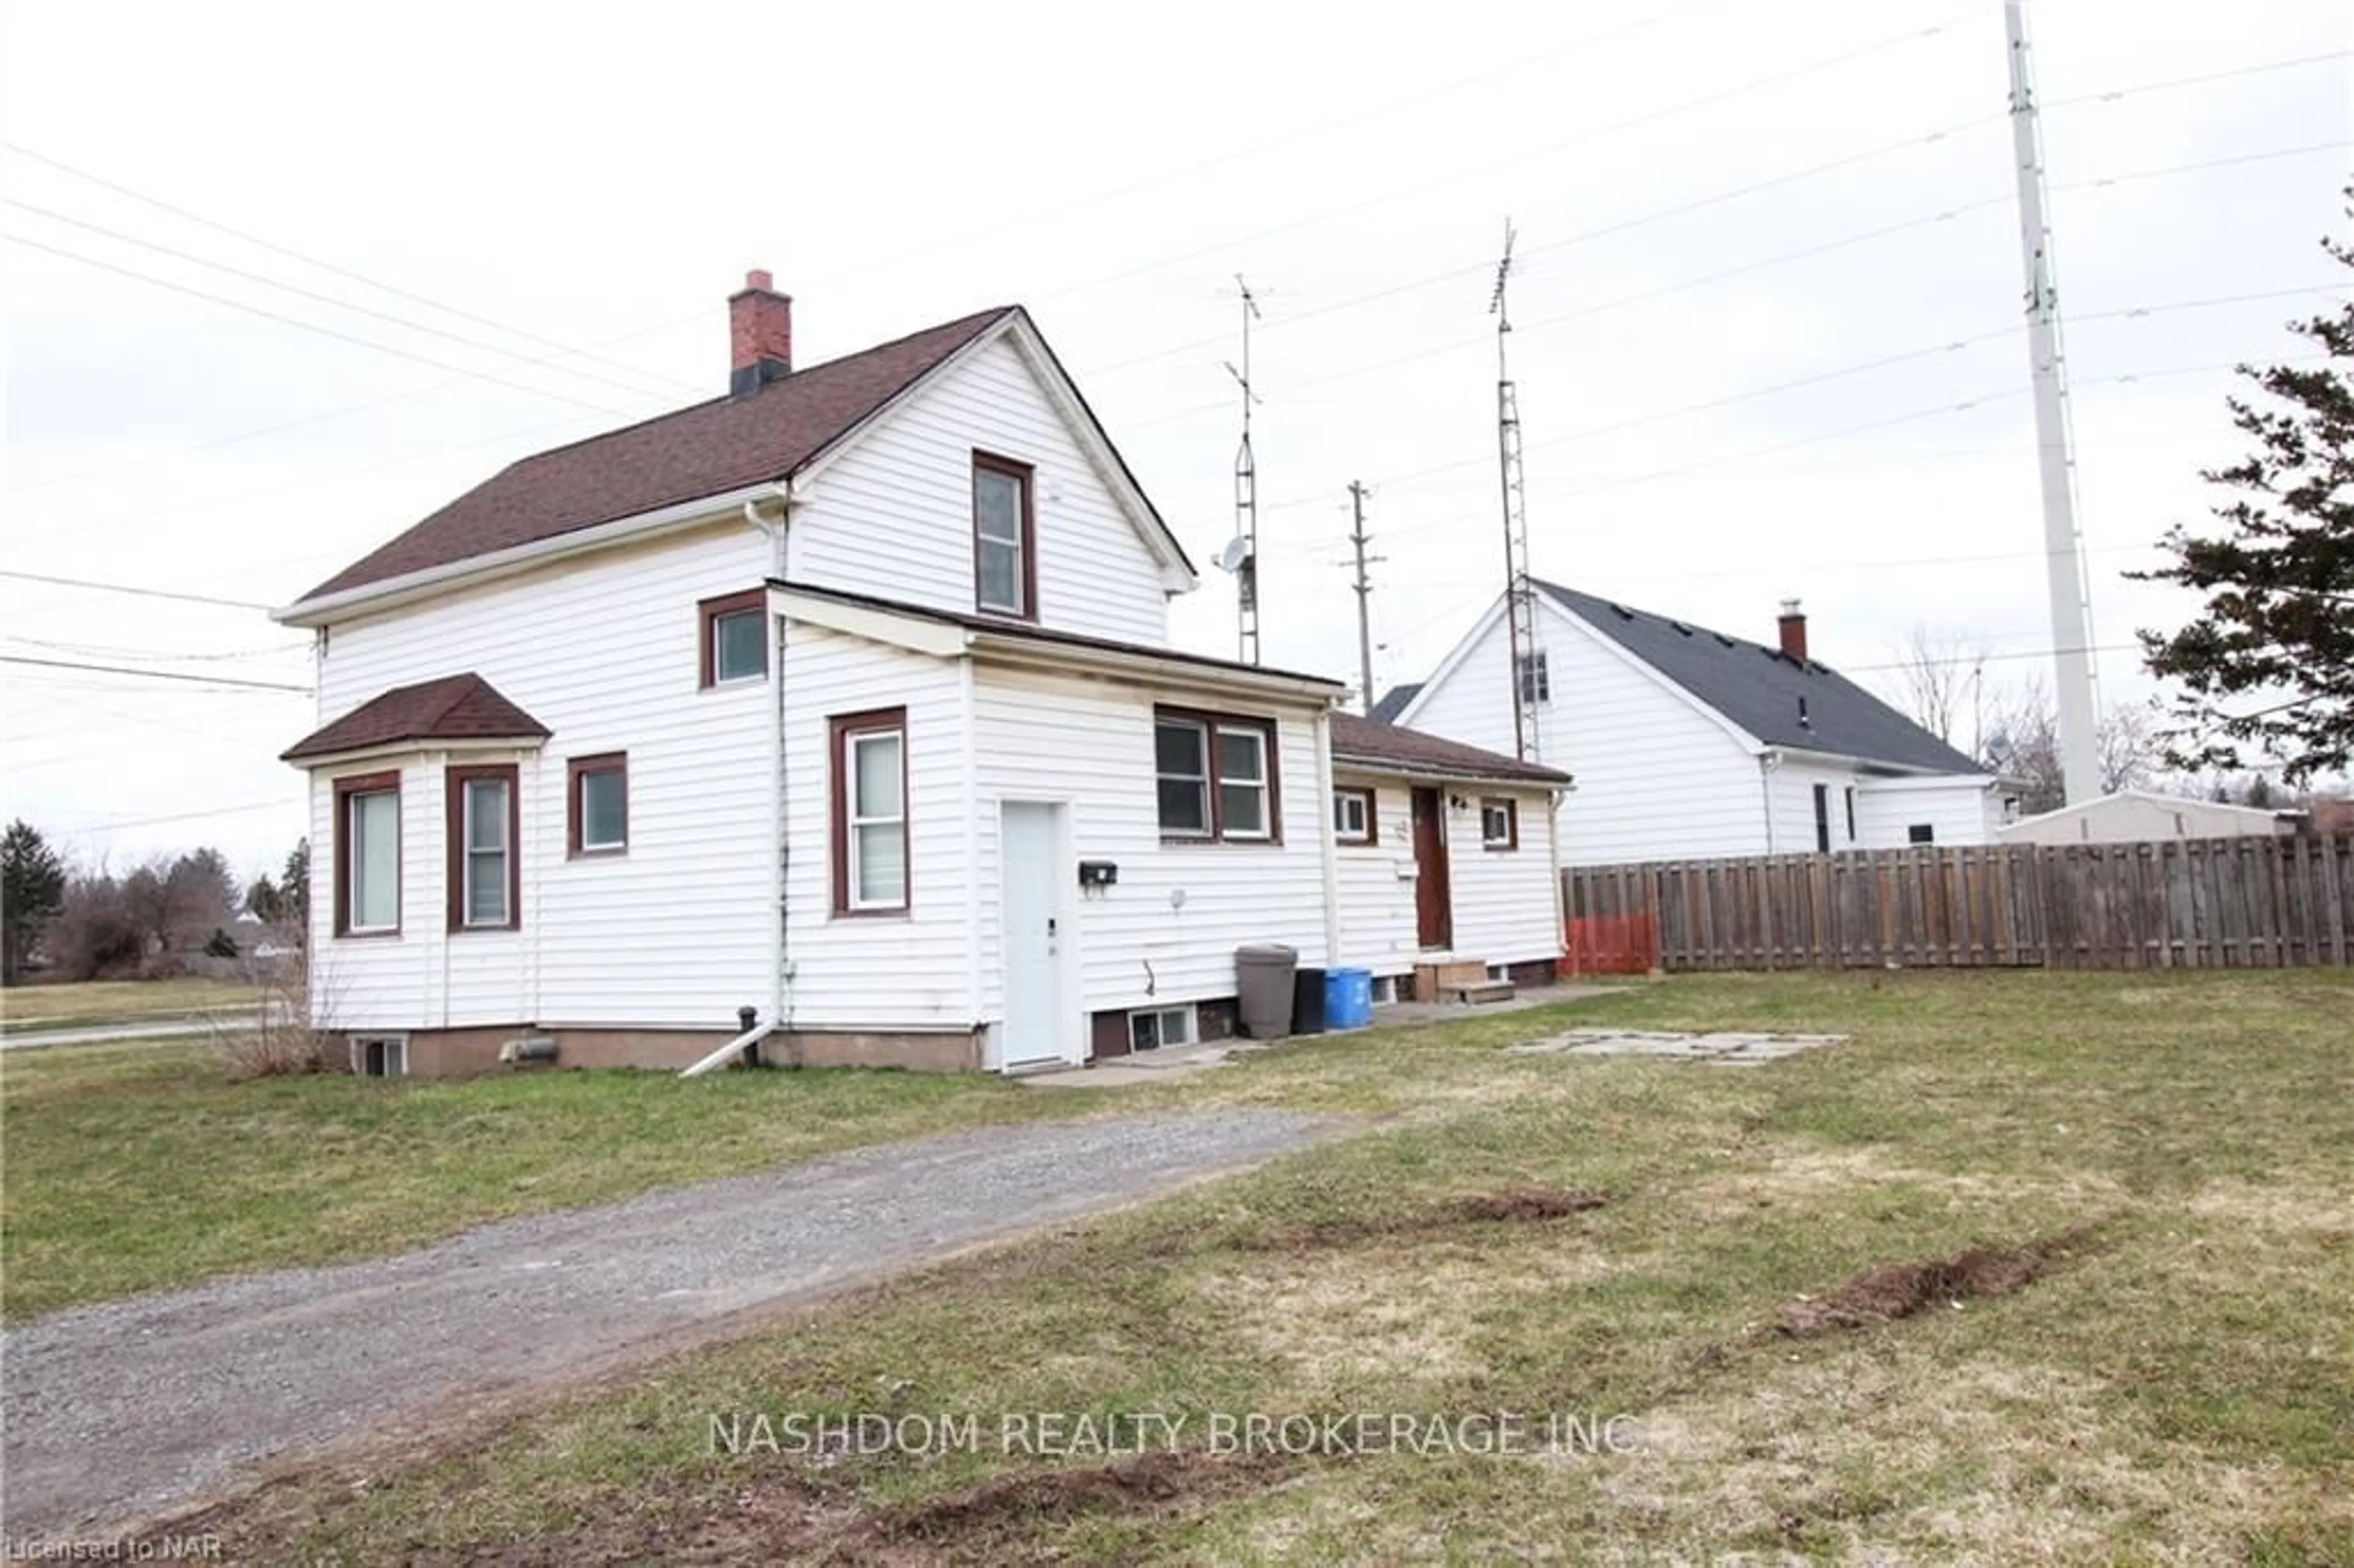 Frontside or backside of a home for 6510 Drummond Rd, Niagara Falls Ontario L2G 4N3